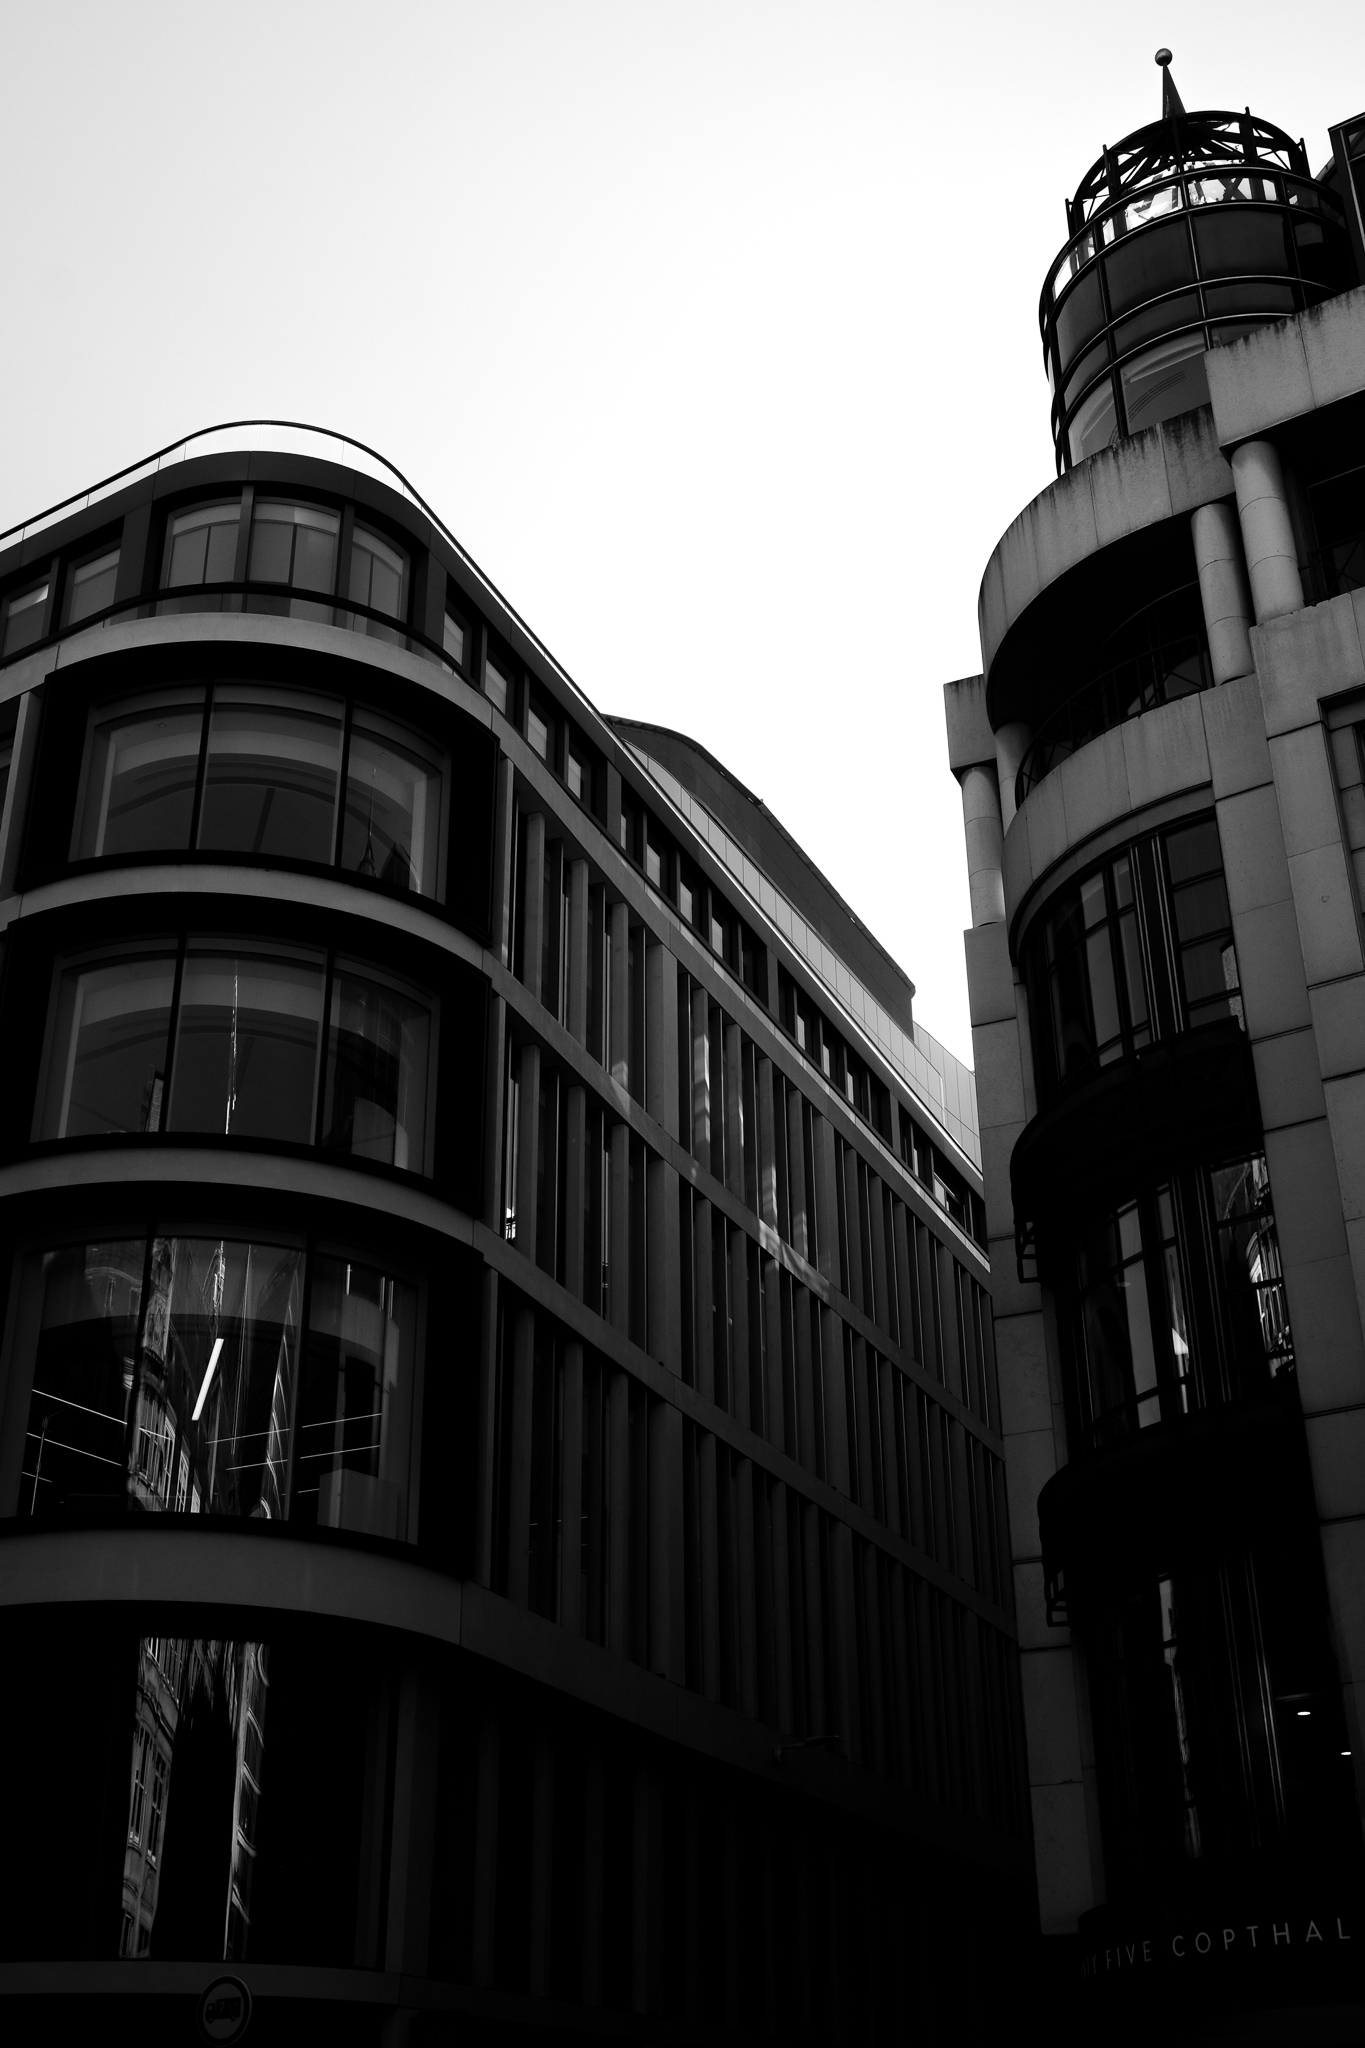 Black and white image of two buildings corners that are rounded off perfectly